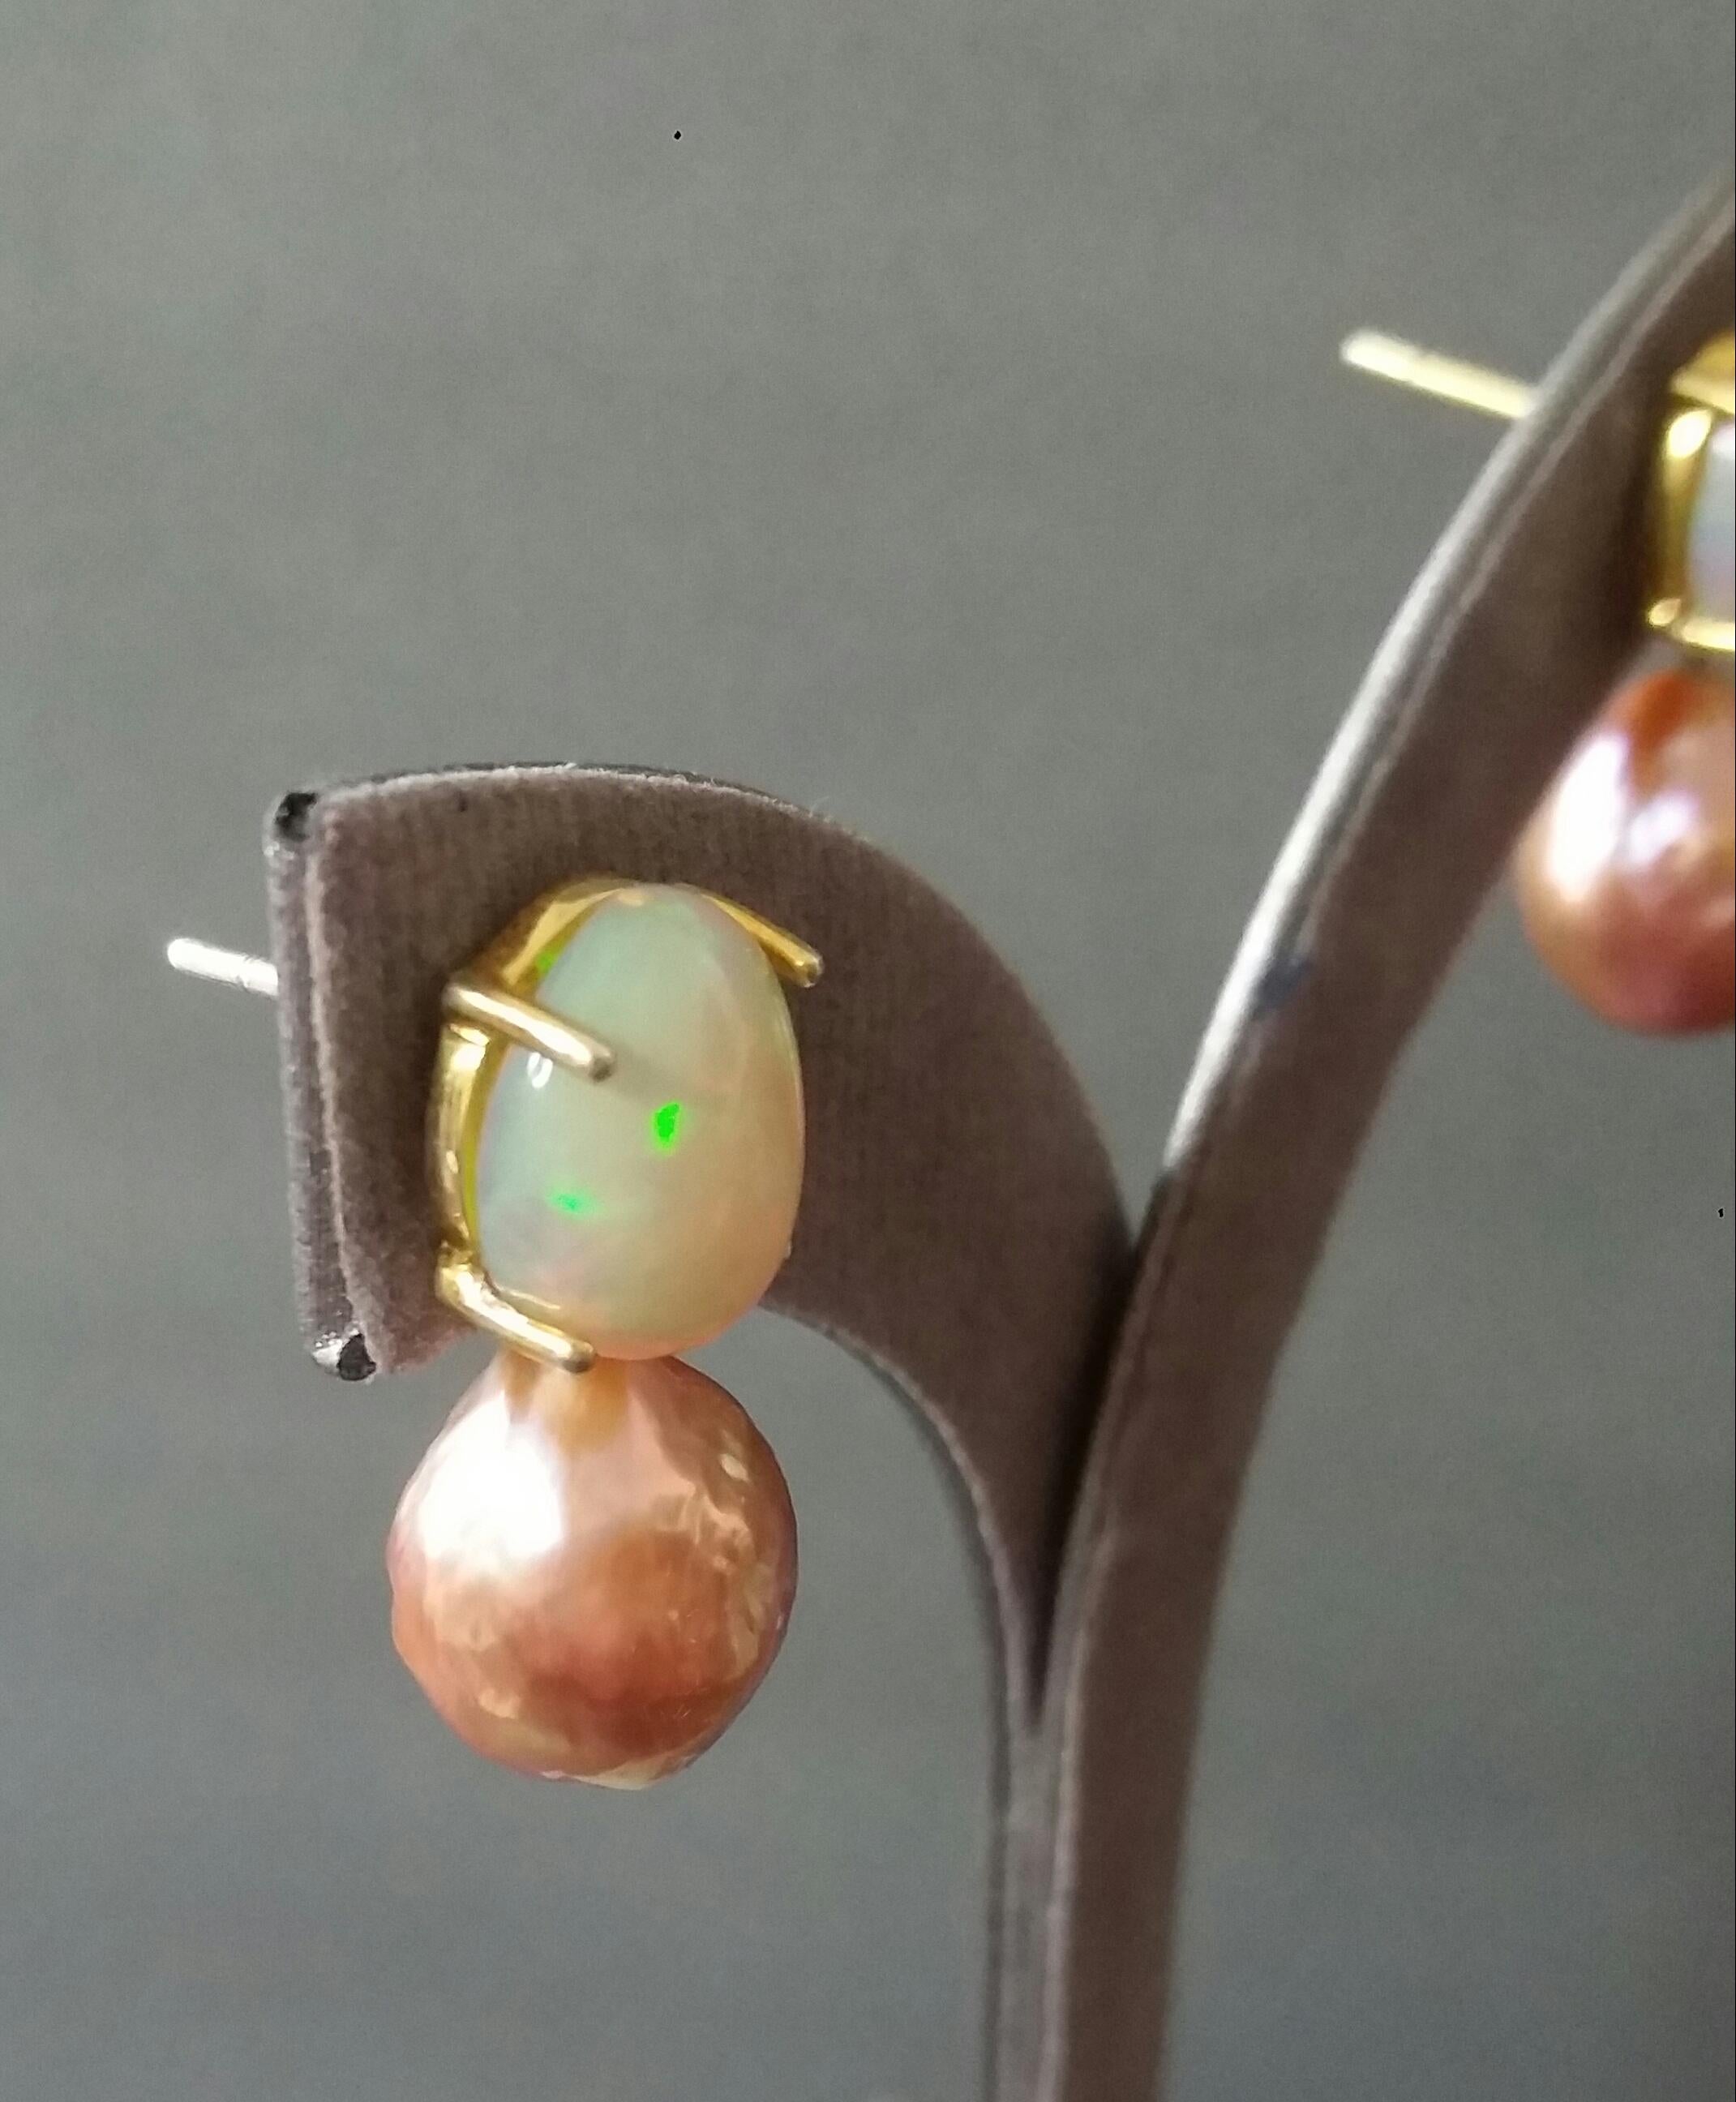 Simple chic stud earrings with a pair of Oval Solid Opal Cabs measuring 9 x 11 mm set in solid 14 Kt. yellow gold on the top and in the lower parts 2 high luster Natural Golden Color  Baroque Pearls measuring 11x13 mm and weighing 20 carats.

In